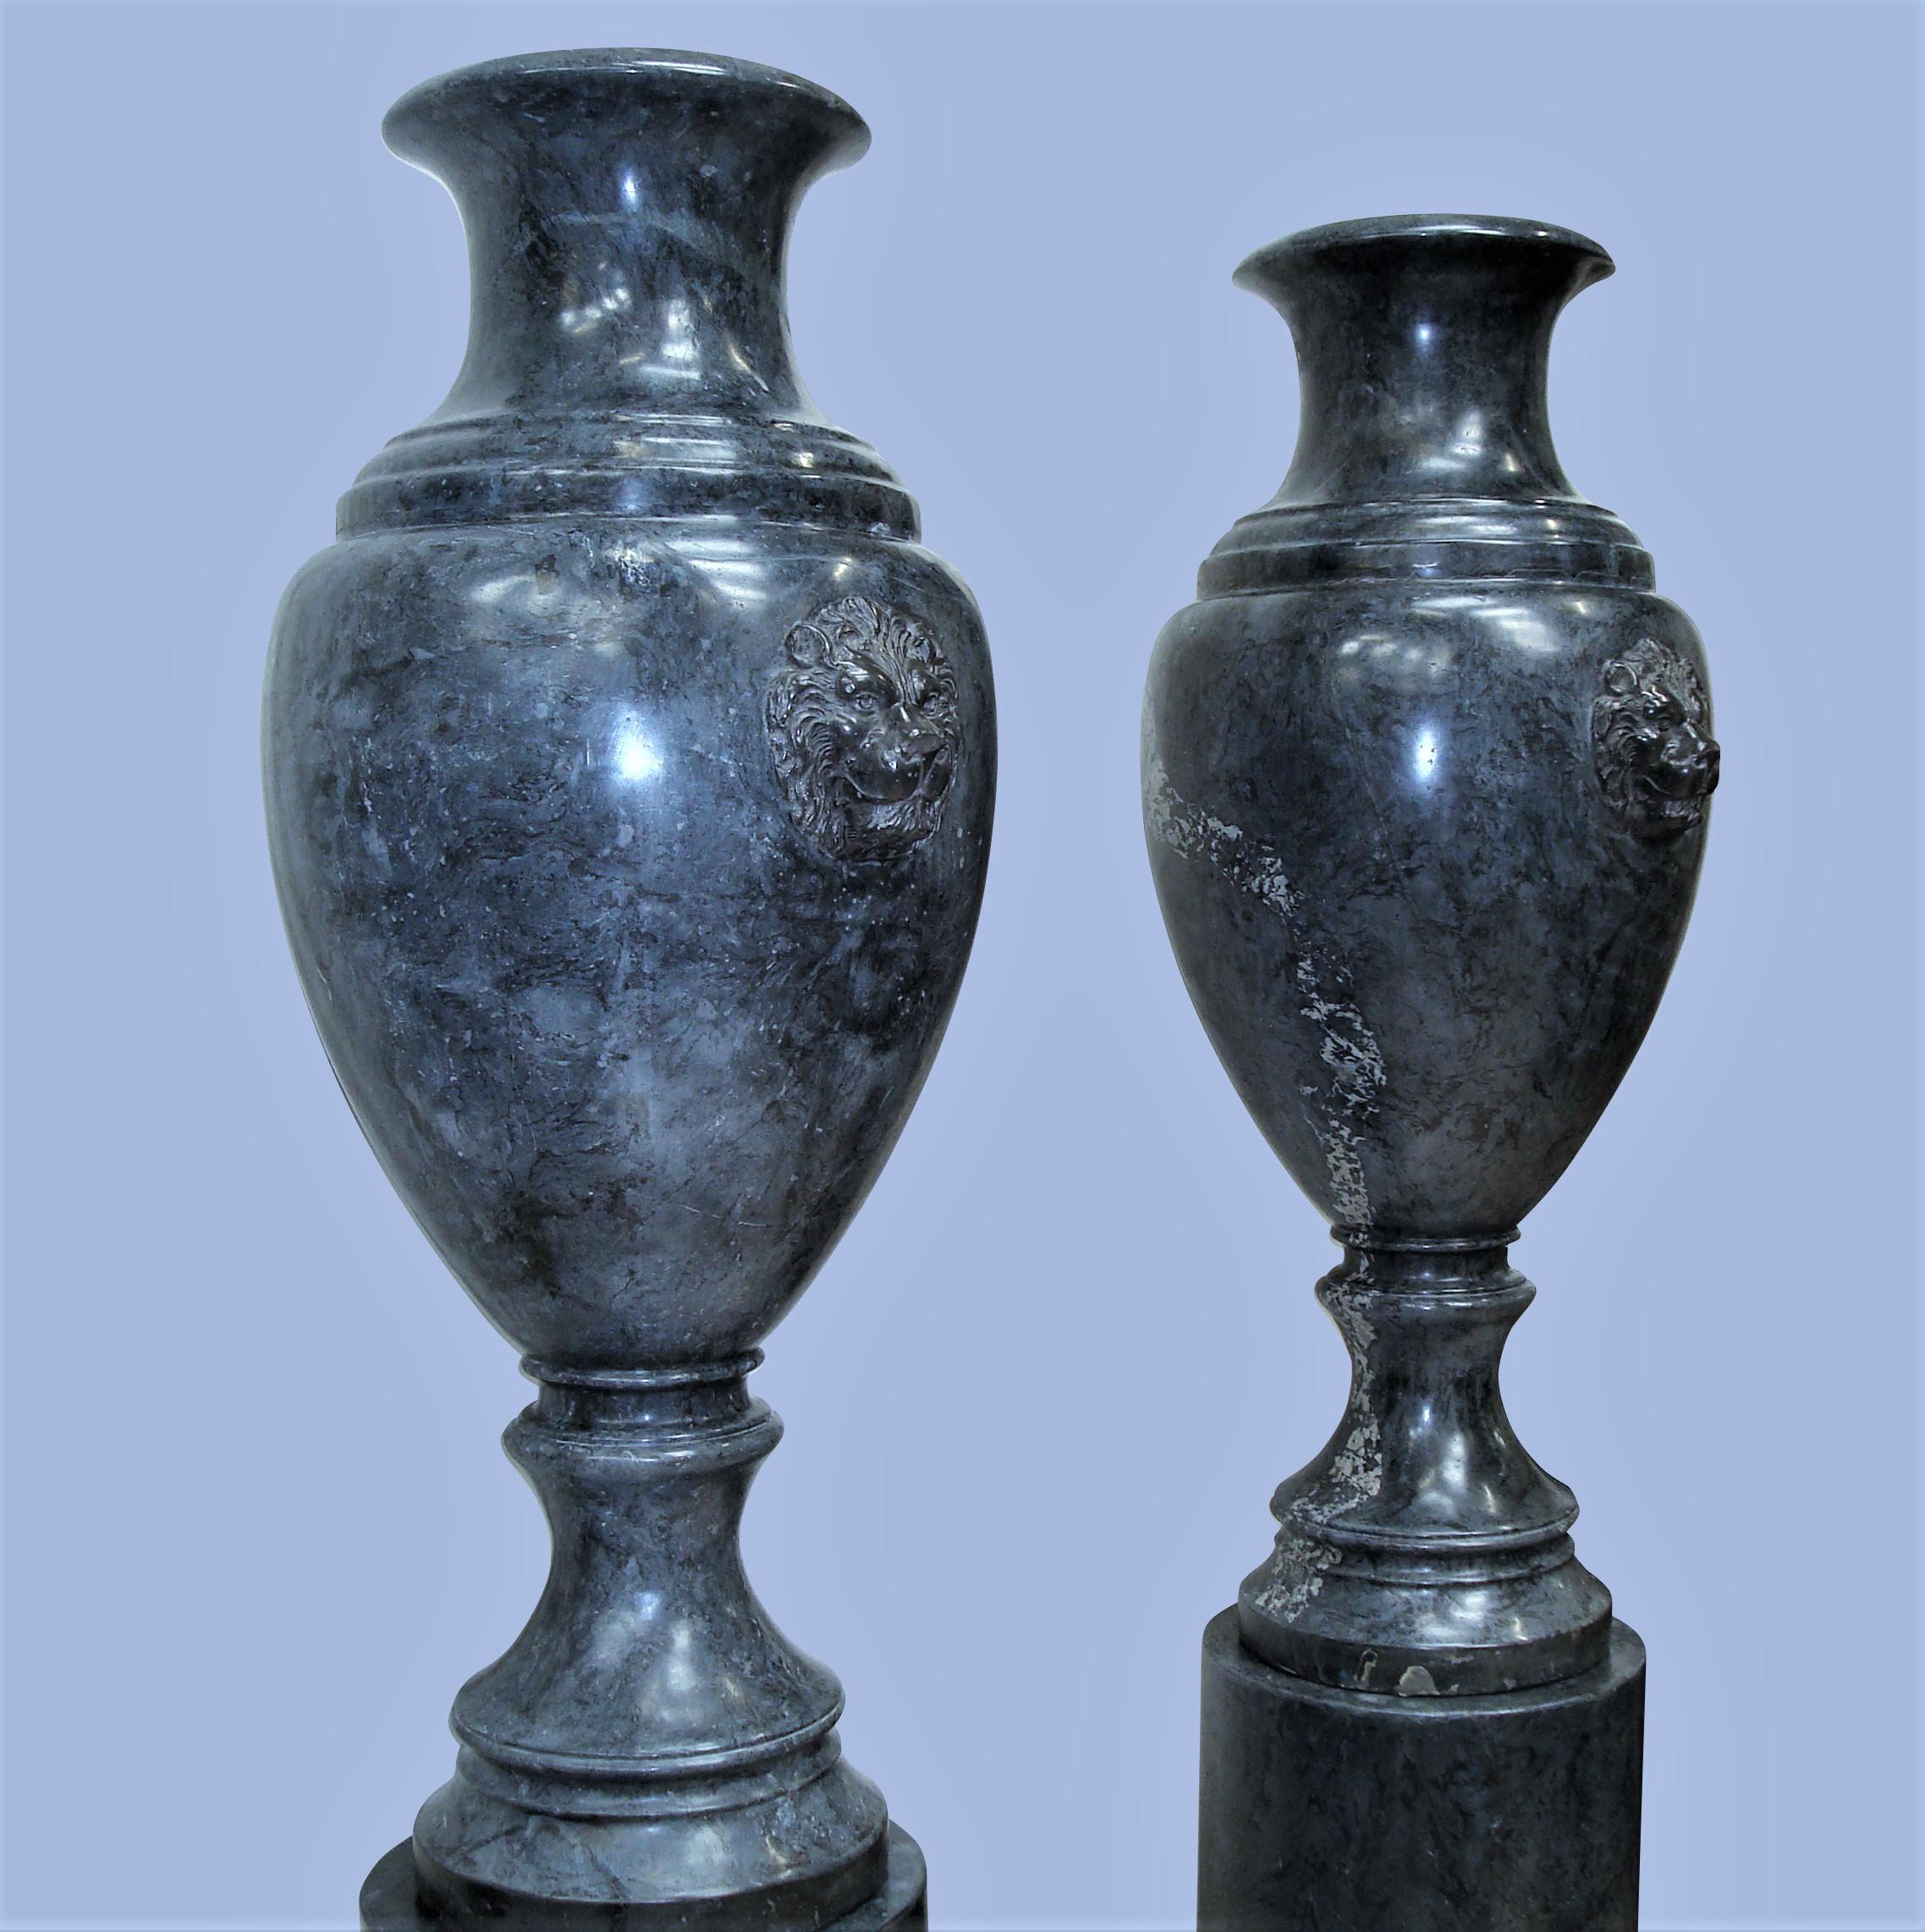 British Early 20th Century Pair of Scagliola Urns on Pedestals For Sale